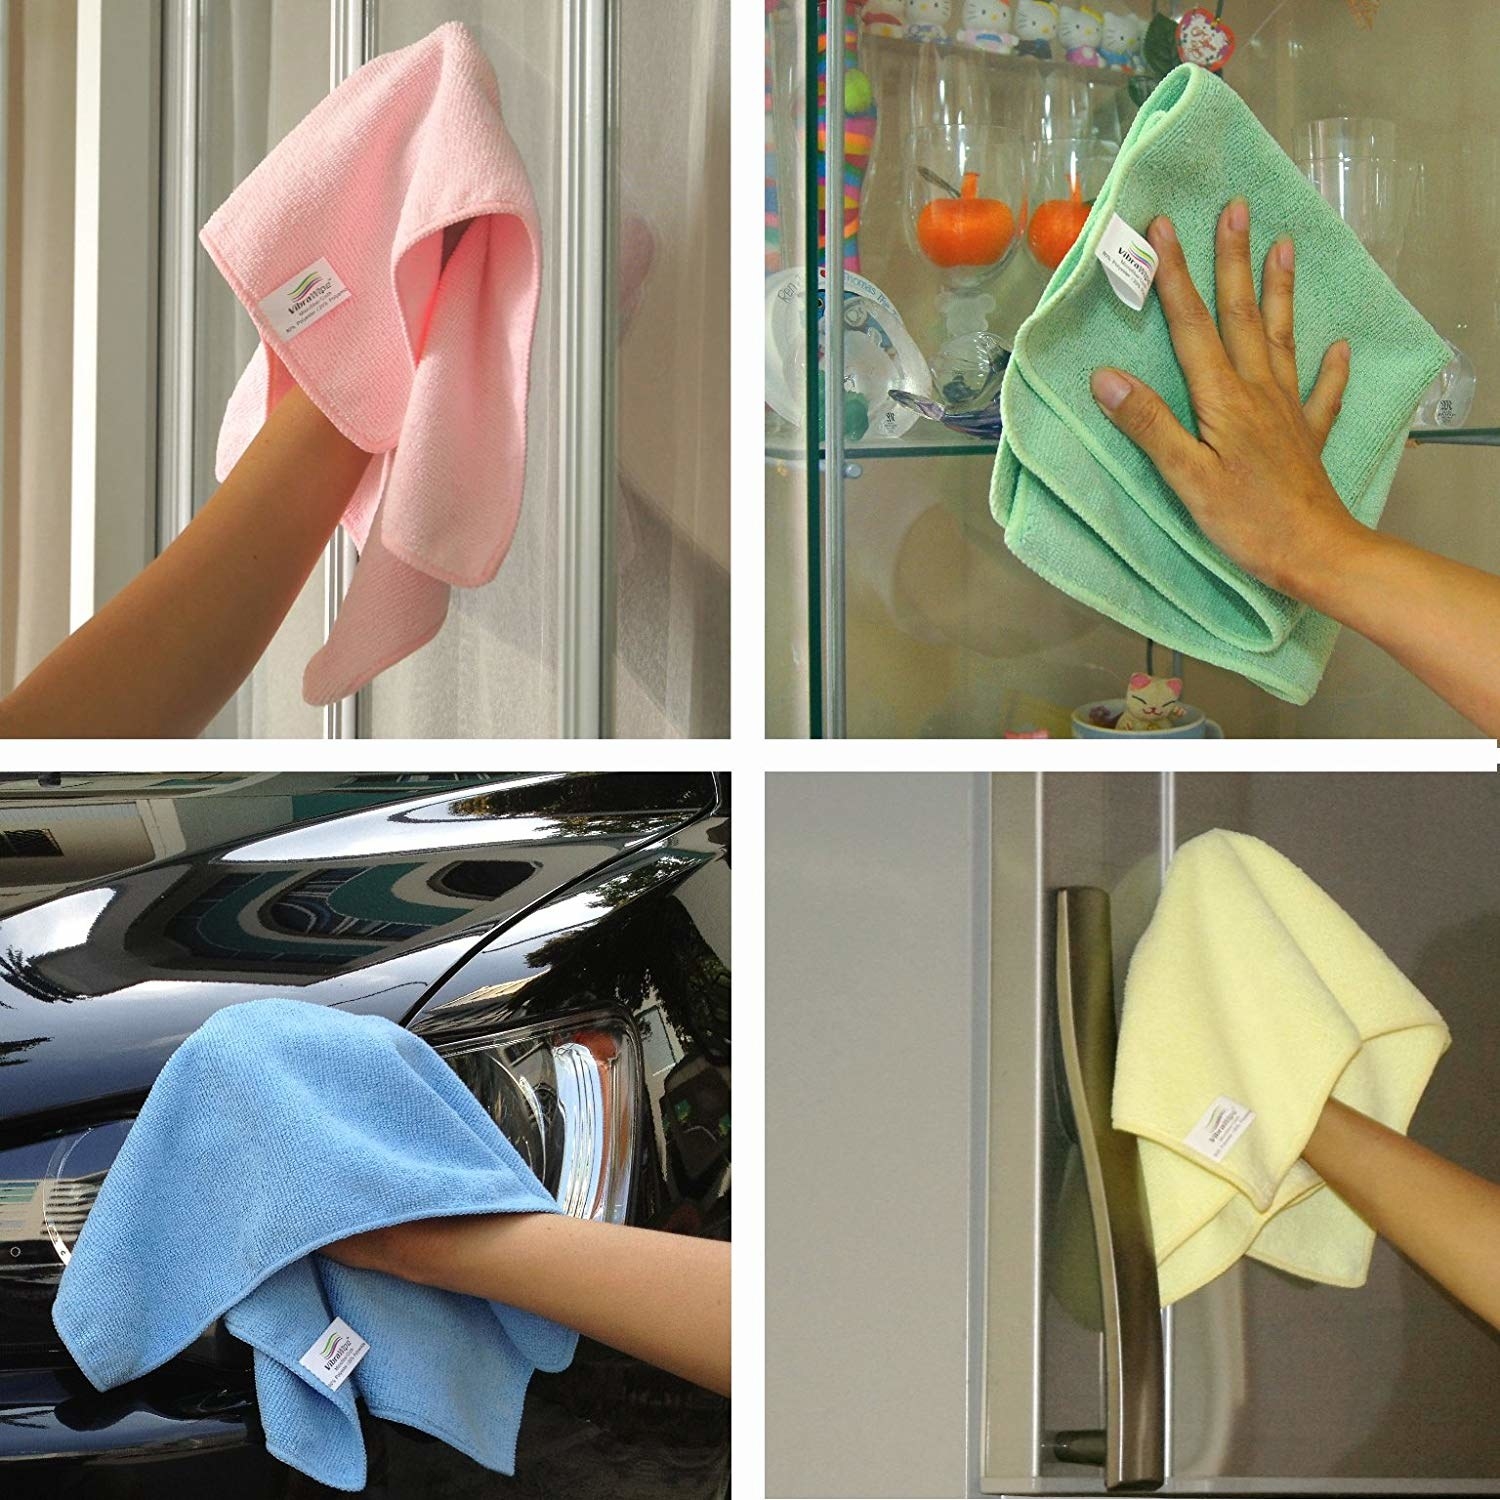 A collage showing the cloths being used on a car, fridge, and glass surface